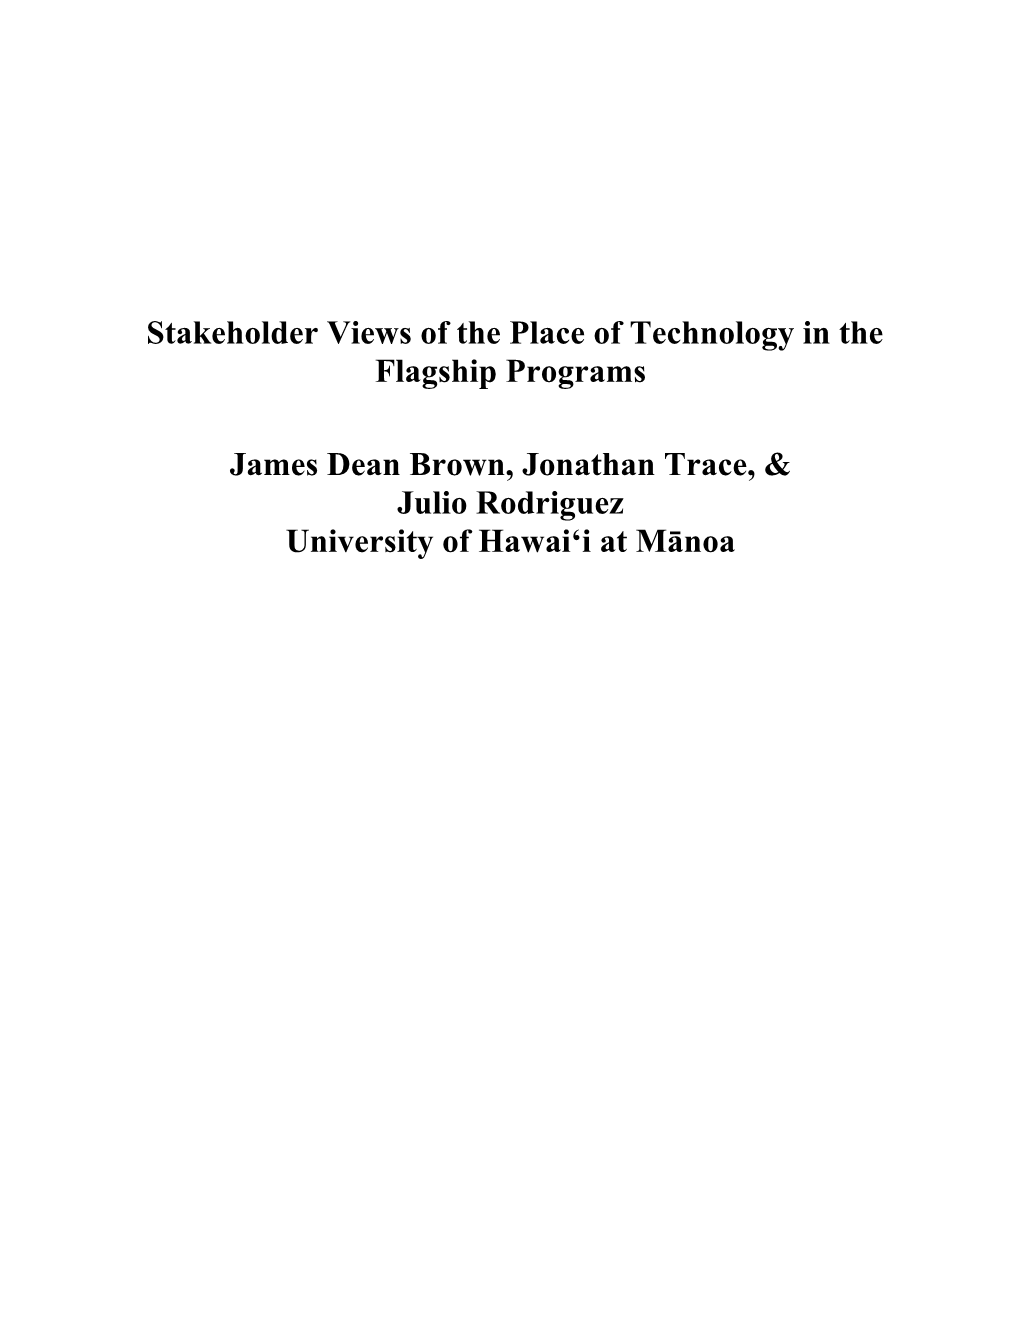 Stakeholder Views of the Place of Technology in the Flagship Programs